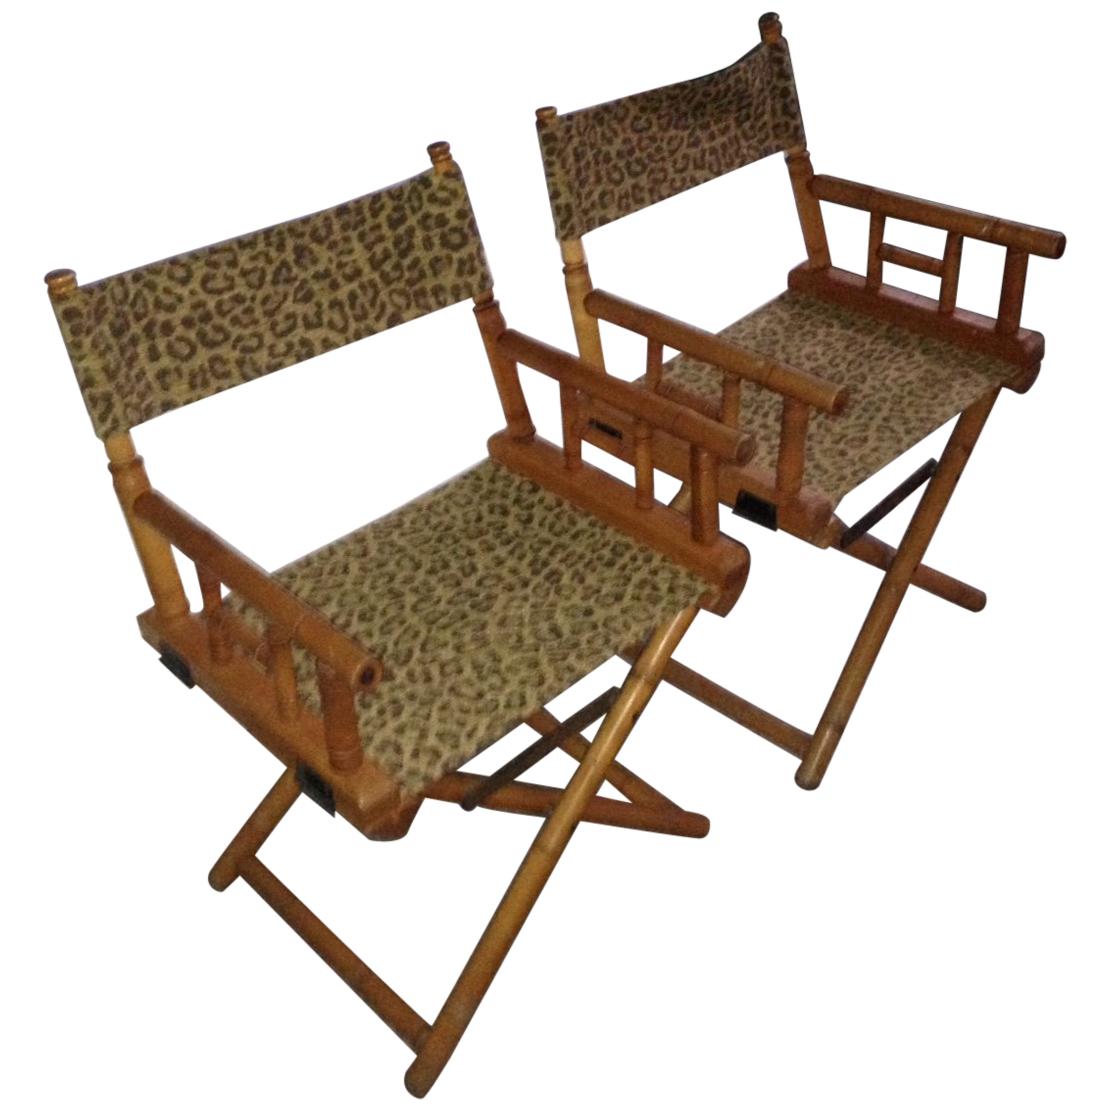 Directors Chairs from Telescope Chair, Leopard Print Fabric, Midcentury, Pair For Sale